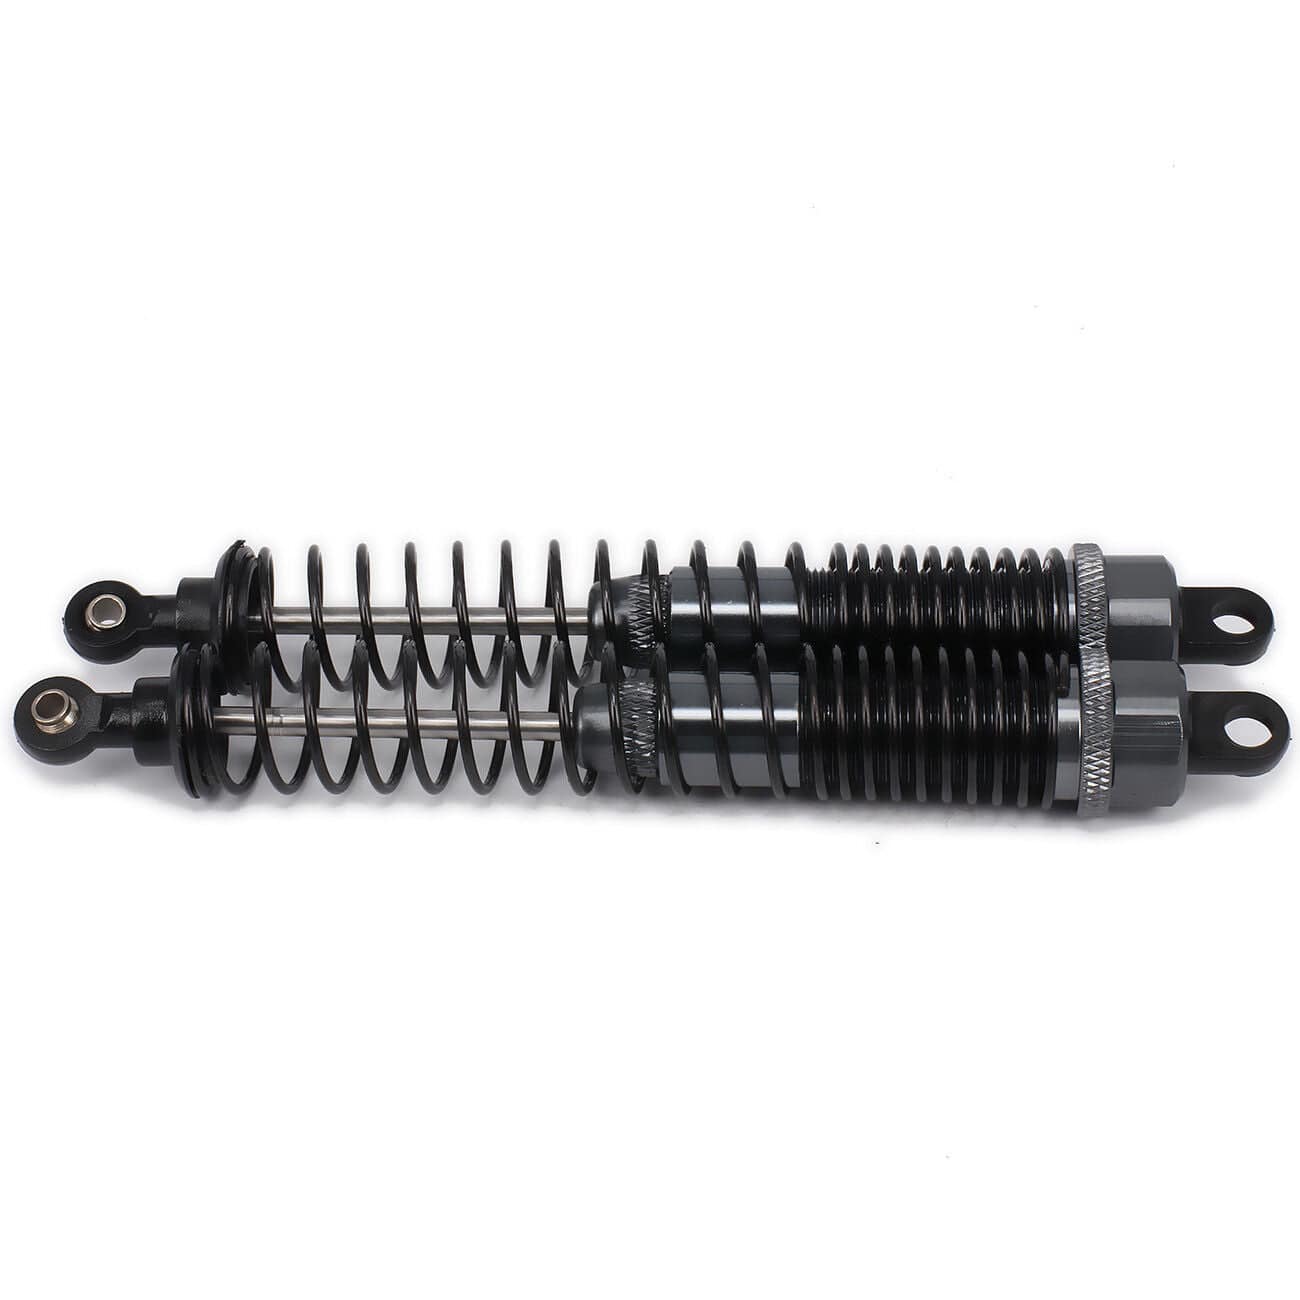 RCAWD RC CAR UPGRADE PARTS Titanium RCAWD Adjustable 130mm RC Shock Absorber Damper For RC Car 1/10 Model Car 2PCS